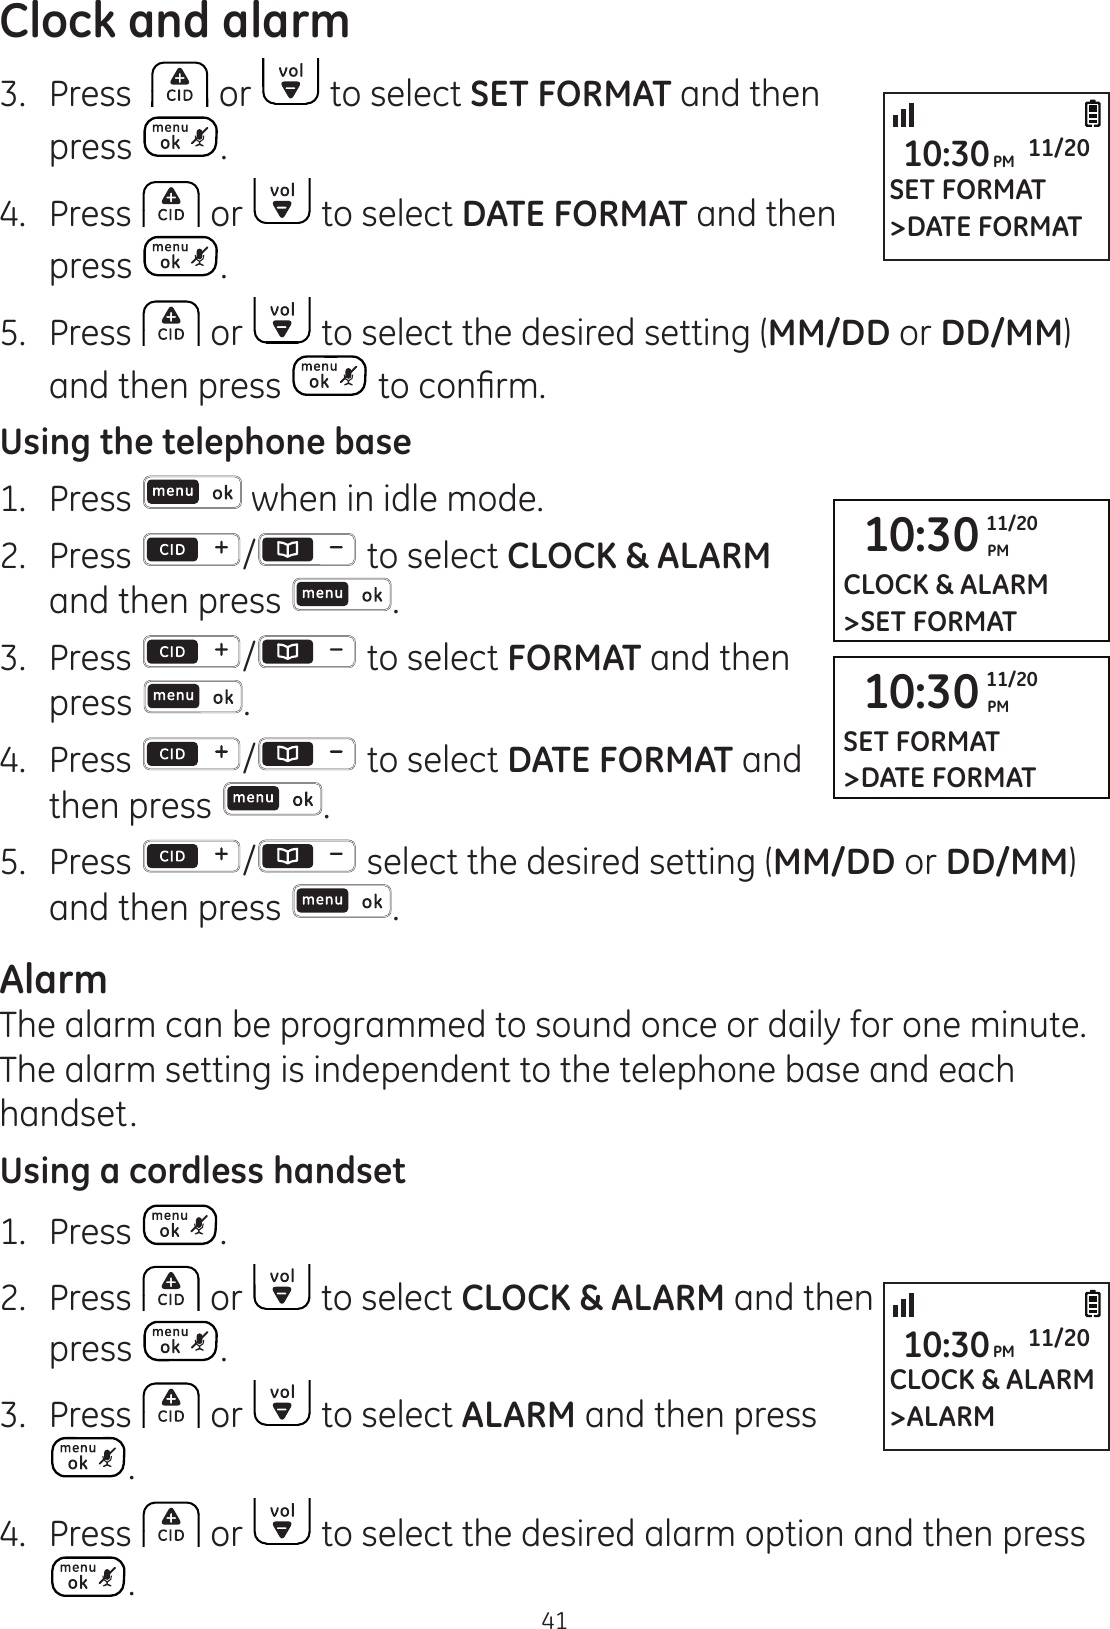 Clock and alarm413.  Press   or   to select SET FORMAT and then press  .4.  Press   or   to select DATE FORMAT and then press  .5.  Press   or   to select the desired setting (MM/DD or DD/MM) and then press  WRFRQ¿UPUsing the telephone base1.  Press   when in idle mode. 2.   Press  /  to select CLOCK &amp; ALARM and then press  .3.  Press  /  to select FORMAT and then press  .4.  Press  /  to select DATE FORMAT and then press  .5.  Press  / select the desired setting (MM/DD or DD/MM) and then press  .AlarmThe alarm can be programmed to sound once or daily for one minute. The alarm setting is independent to the telephone base and each handset.Using a cordless handset1.  Press  .2.  Press   or   to select CLOCK &amp; ALARM and then  press  .3.  Press   or   to select ALARM and then press .4.  Press   or   to select the desired alarm option and then press .SET FORMAT&gt;DATE FORMAT10:30PM 11/2010:30 PM11/20SET FORMAT&gt;DATE FORMAT10:30 PM11/20CLOCK &amp; ALARM&gt;SET FORMATCLOCK &amp; ALARM&gt;ALARM10:30PM 11/20